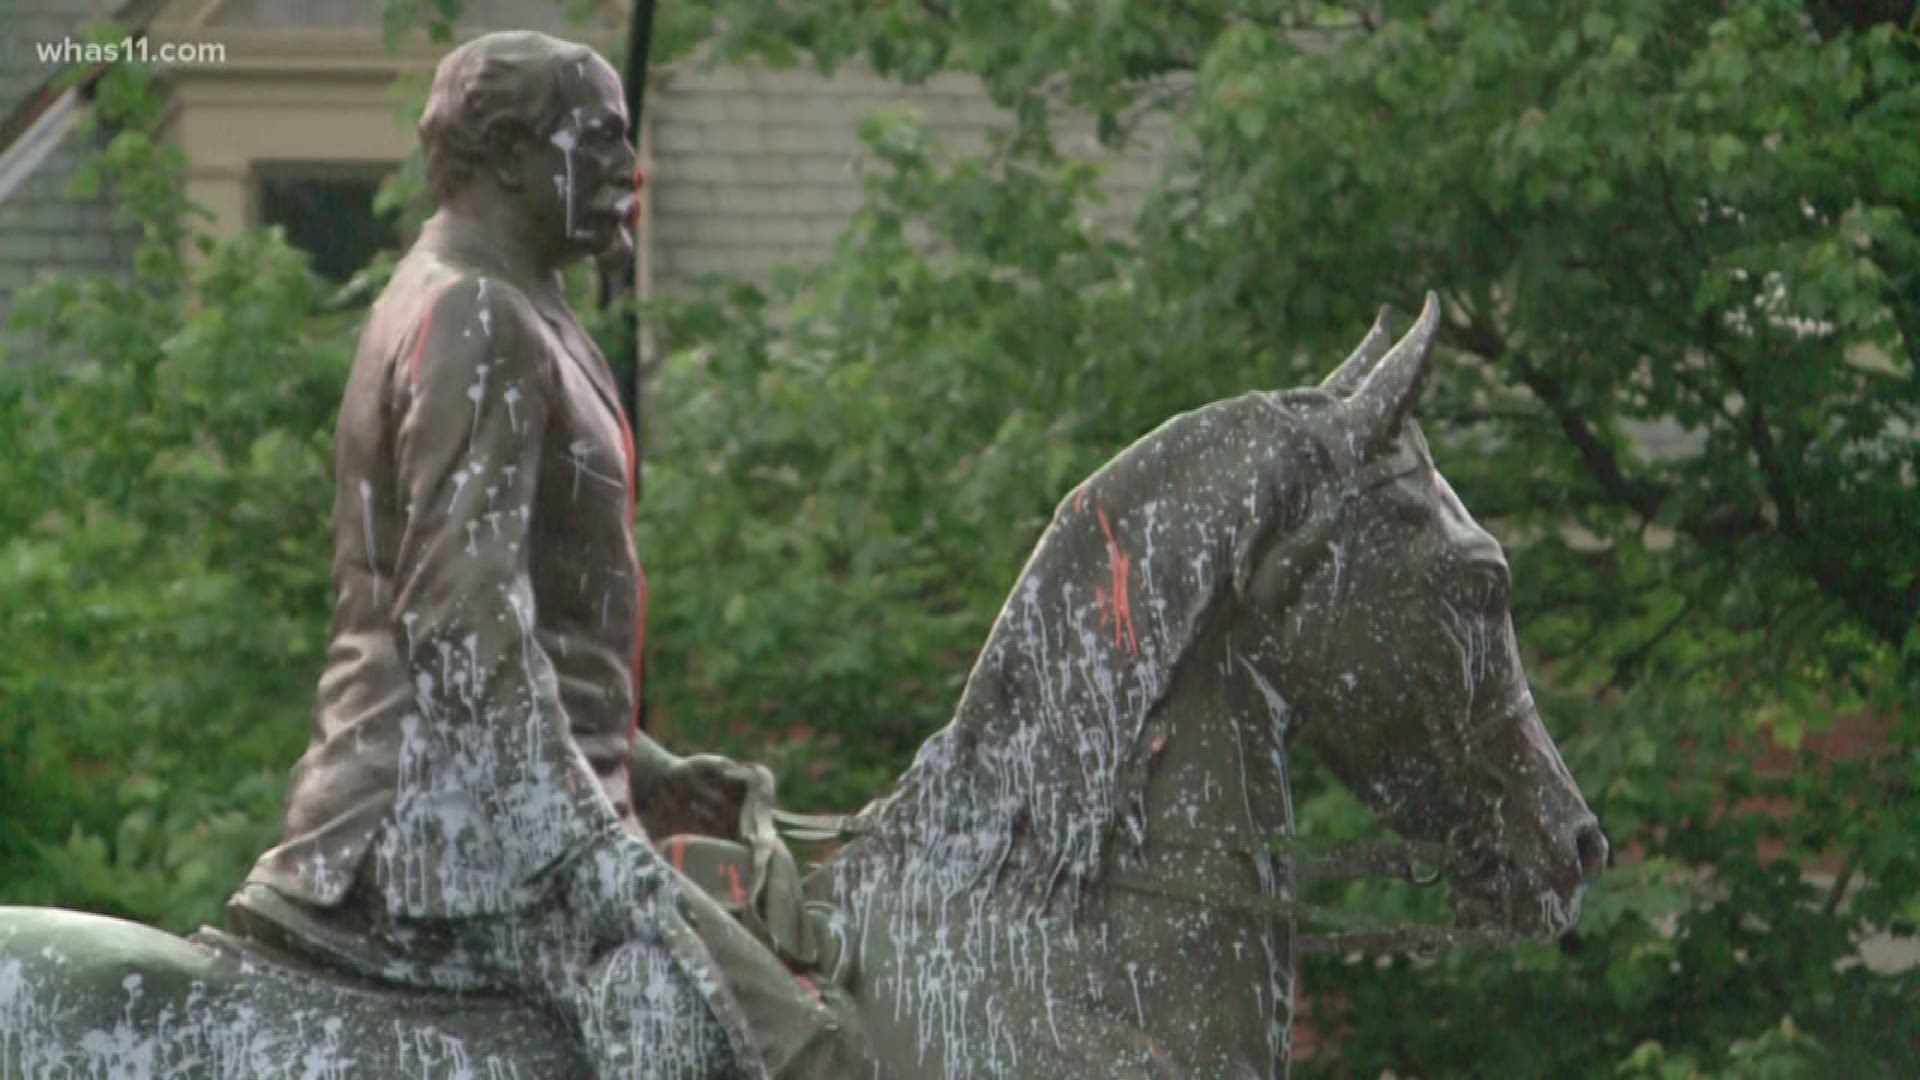 A new group is filing a complaint to protect statues and public art around the city. This move continues the fight over the John B. Castleman statue.